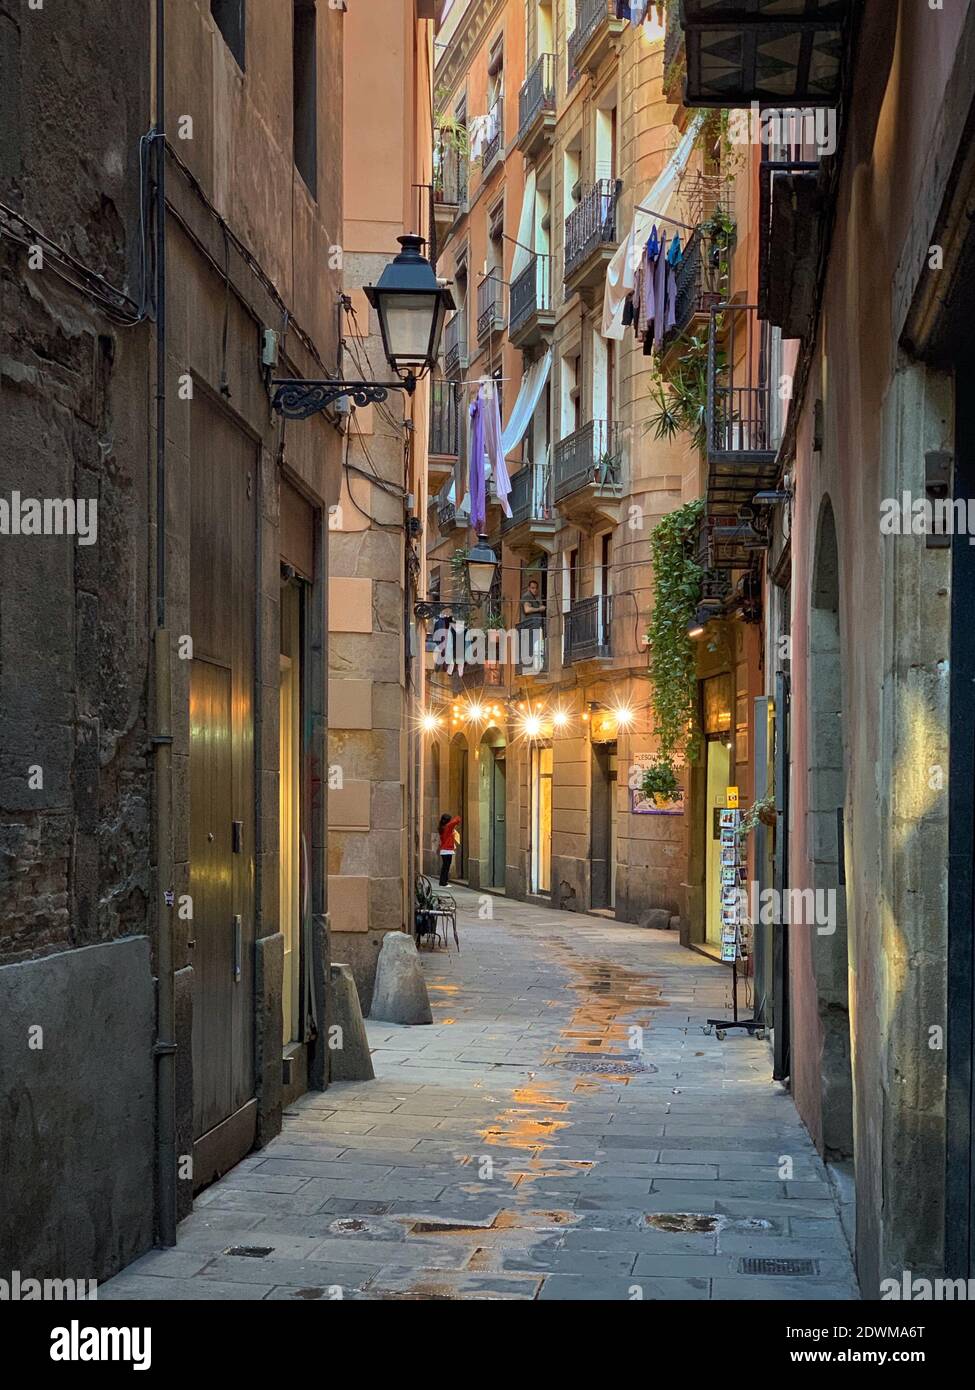 Empty Alley Amidst Buildings In City Stock Photo